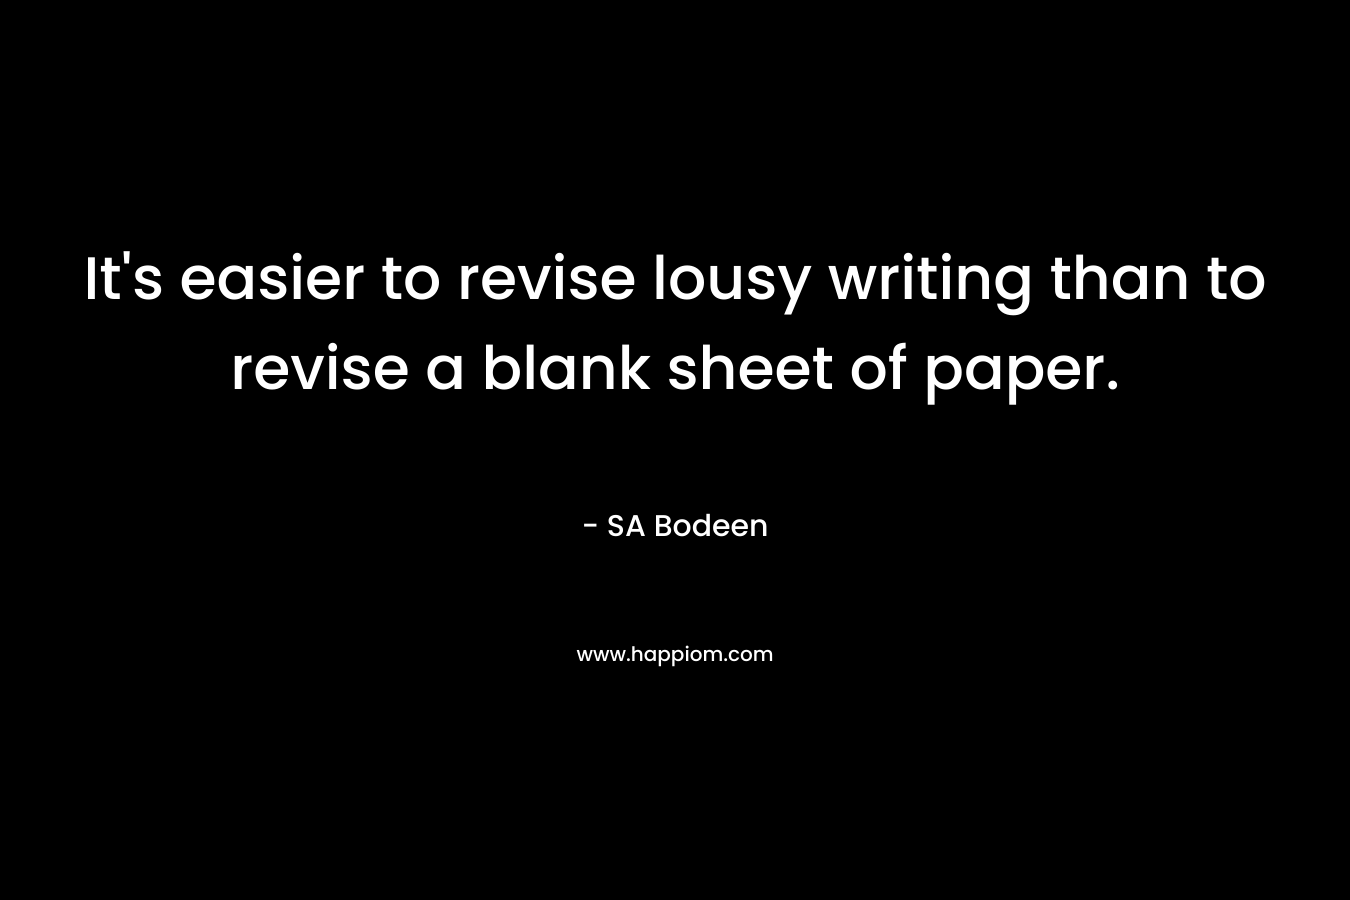 It’s easier to revise lousy writing than to revise a blank sheet of paper. – SA Bodeen